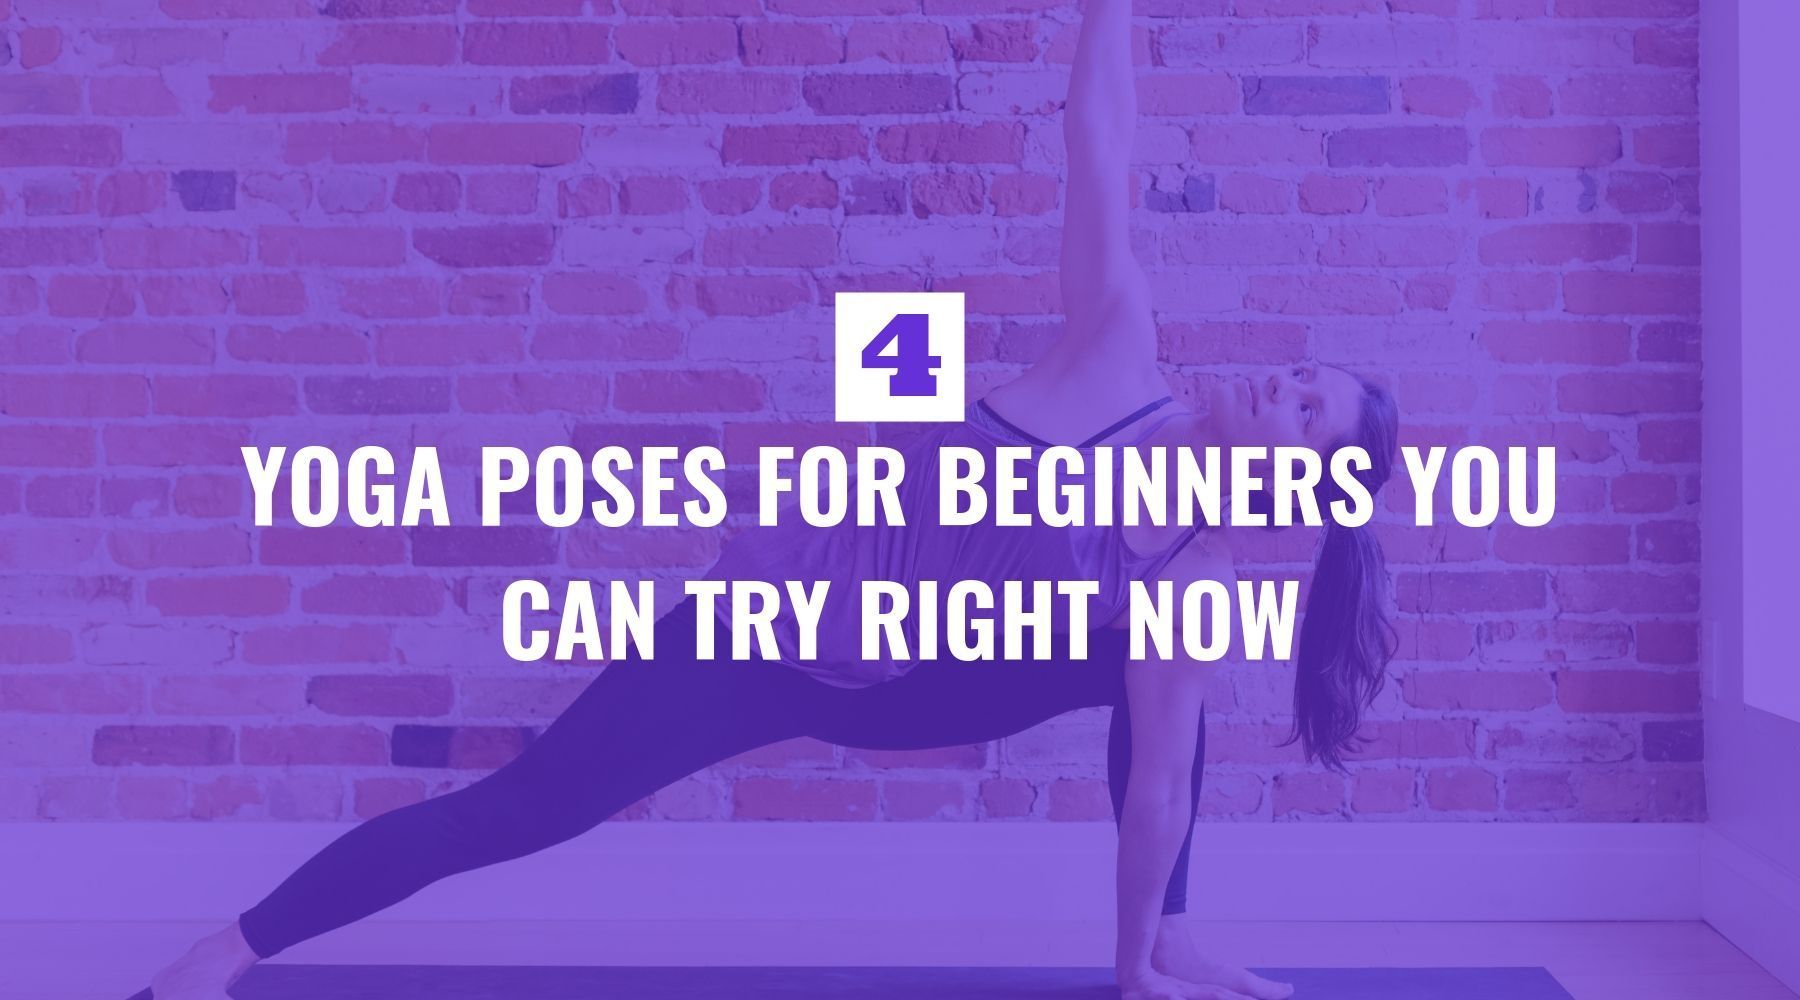 Four Yoga Poses for Beginners You Can Try Right Now